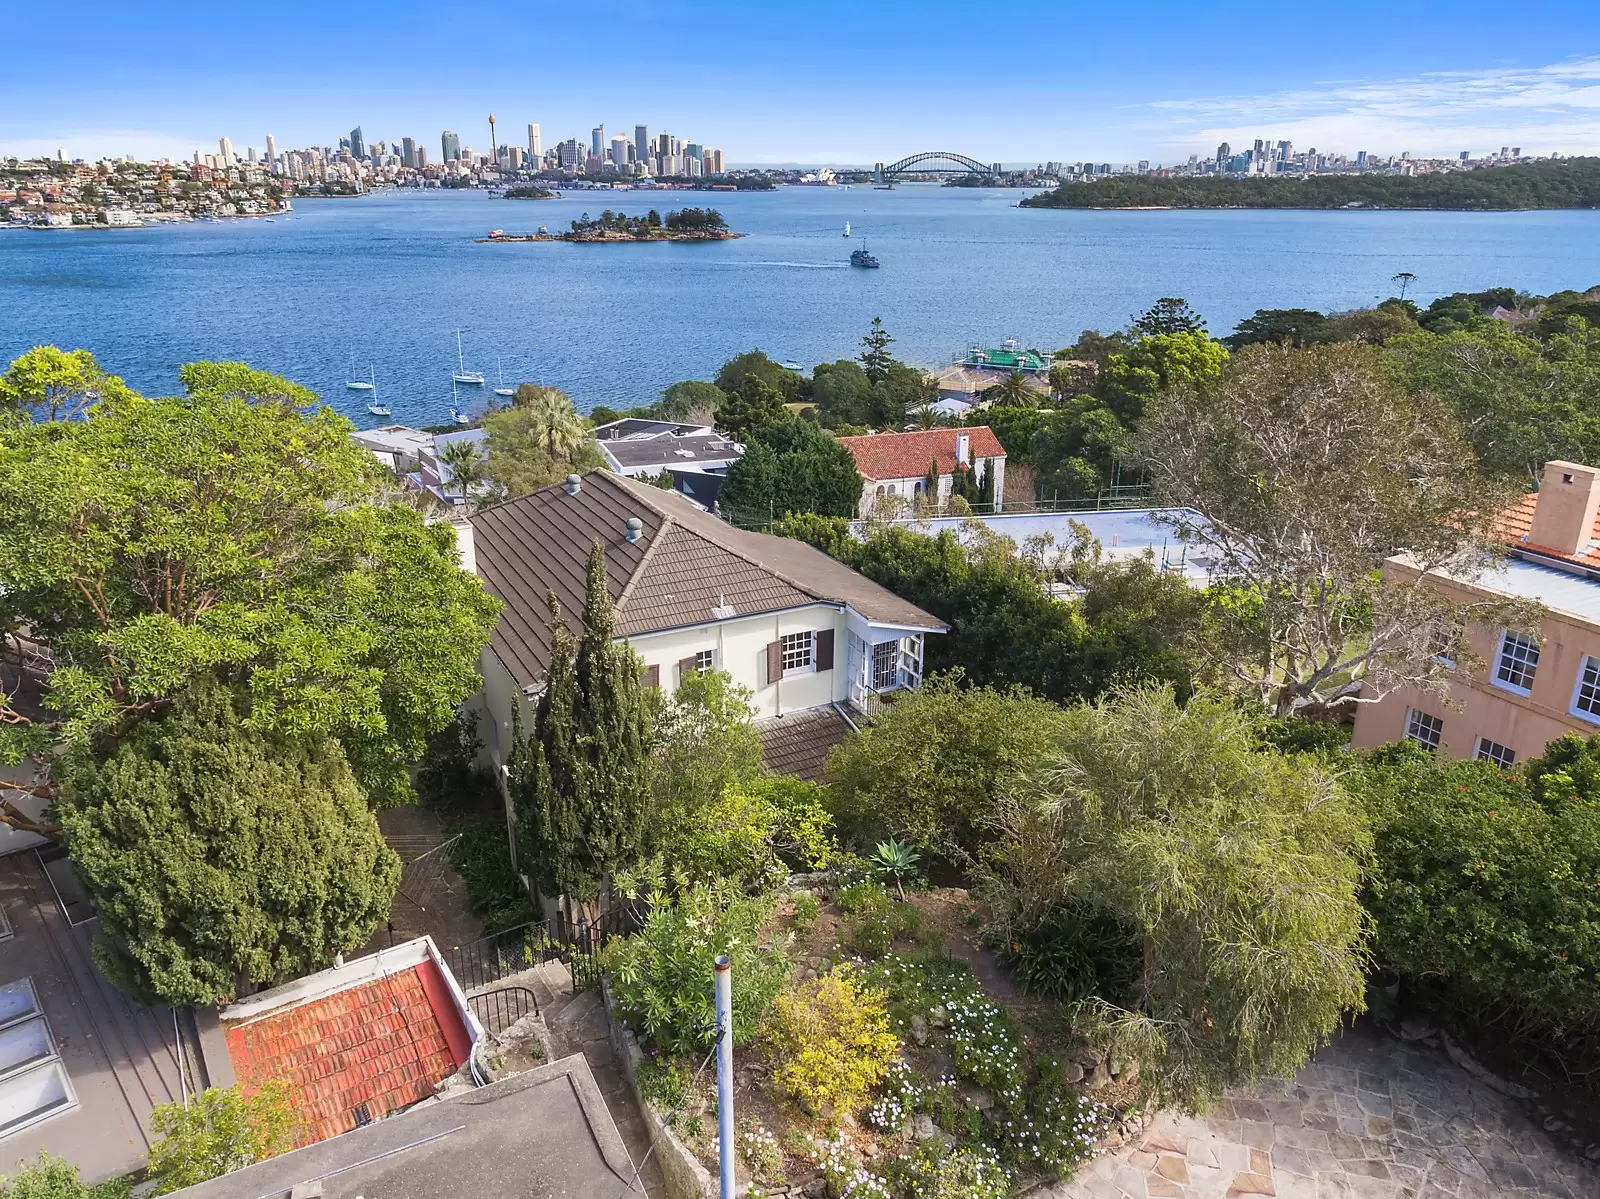 Photo #11: 32 Wentworth Road, Vaucluse - Sold by Sydney Sotheby's International Realty